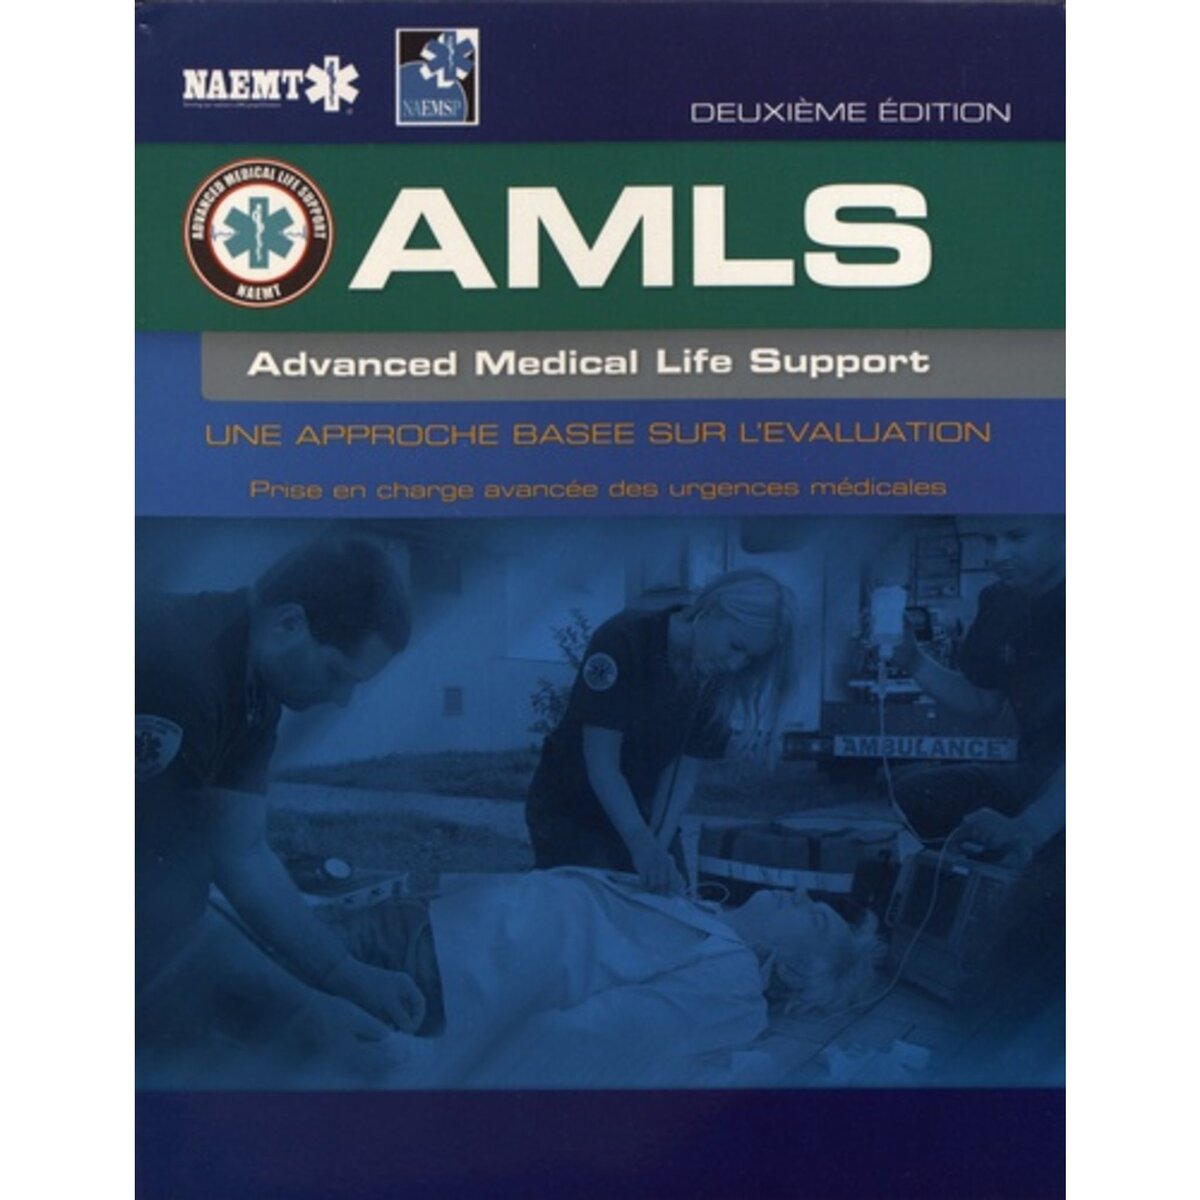  AMLS ADVANCED MEDICAL LIFE SUPPORT. UNE APPROCHE BASEE SUR L'EVALUATION, 2E EDITION, NAEMT